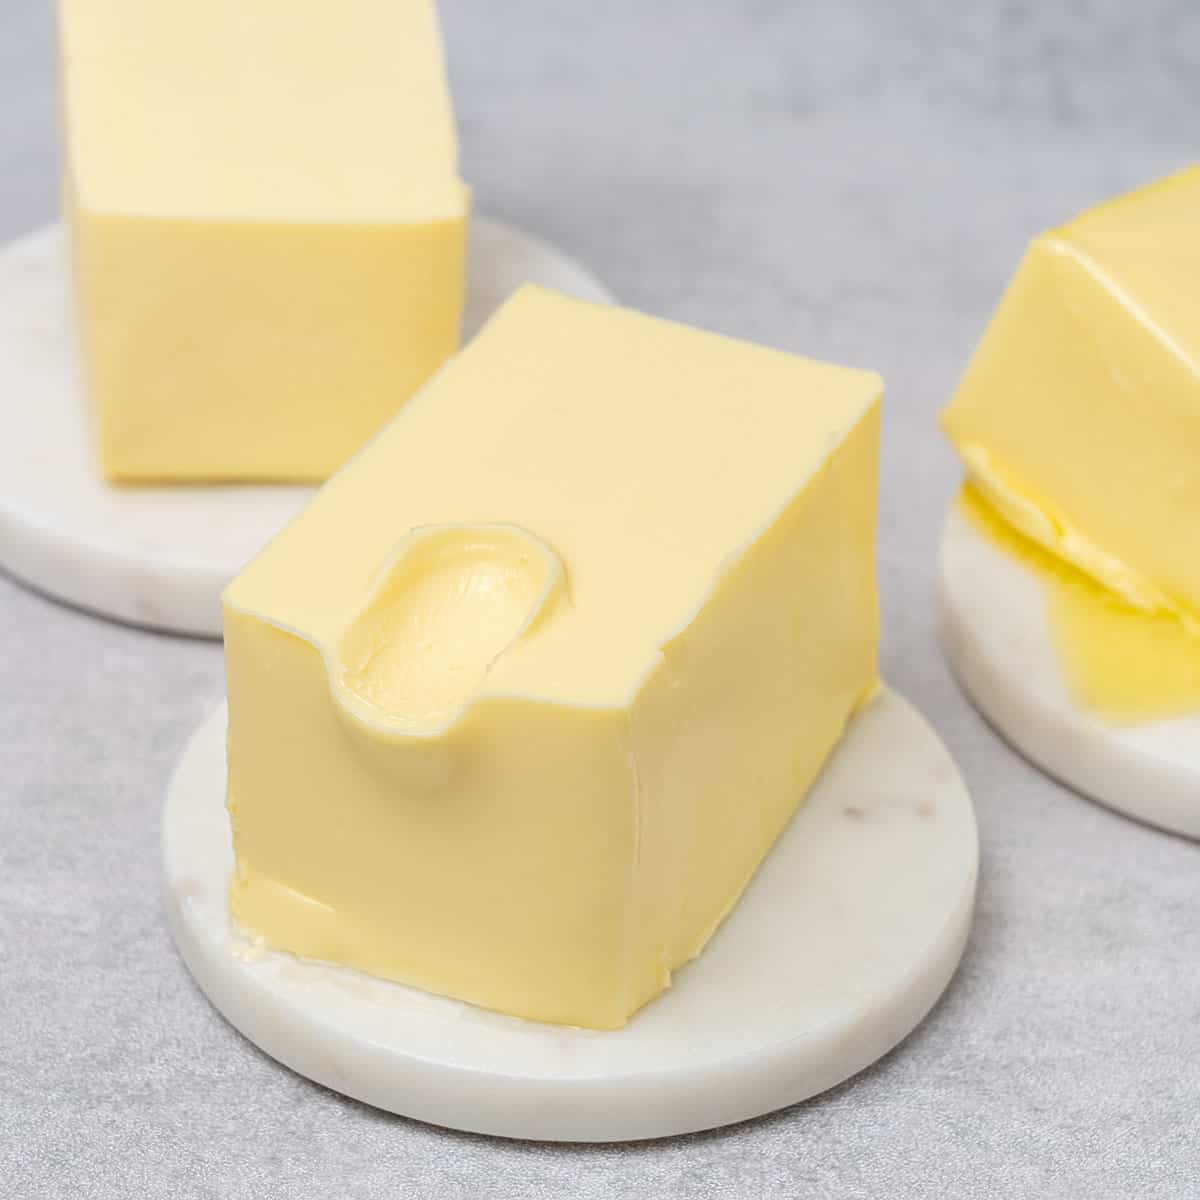 3 different types of softened butter.